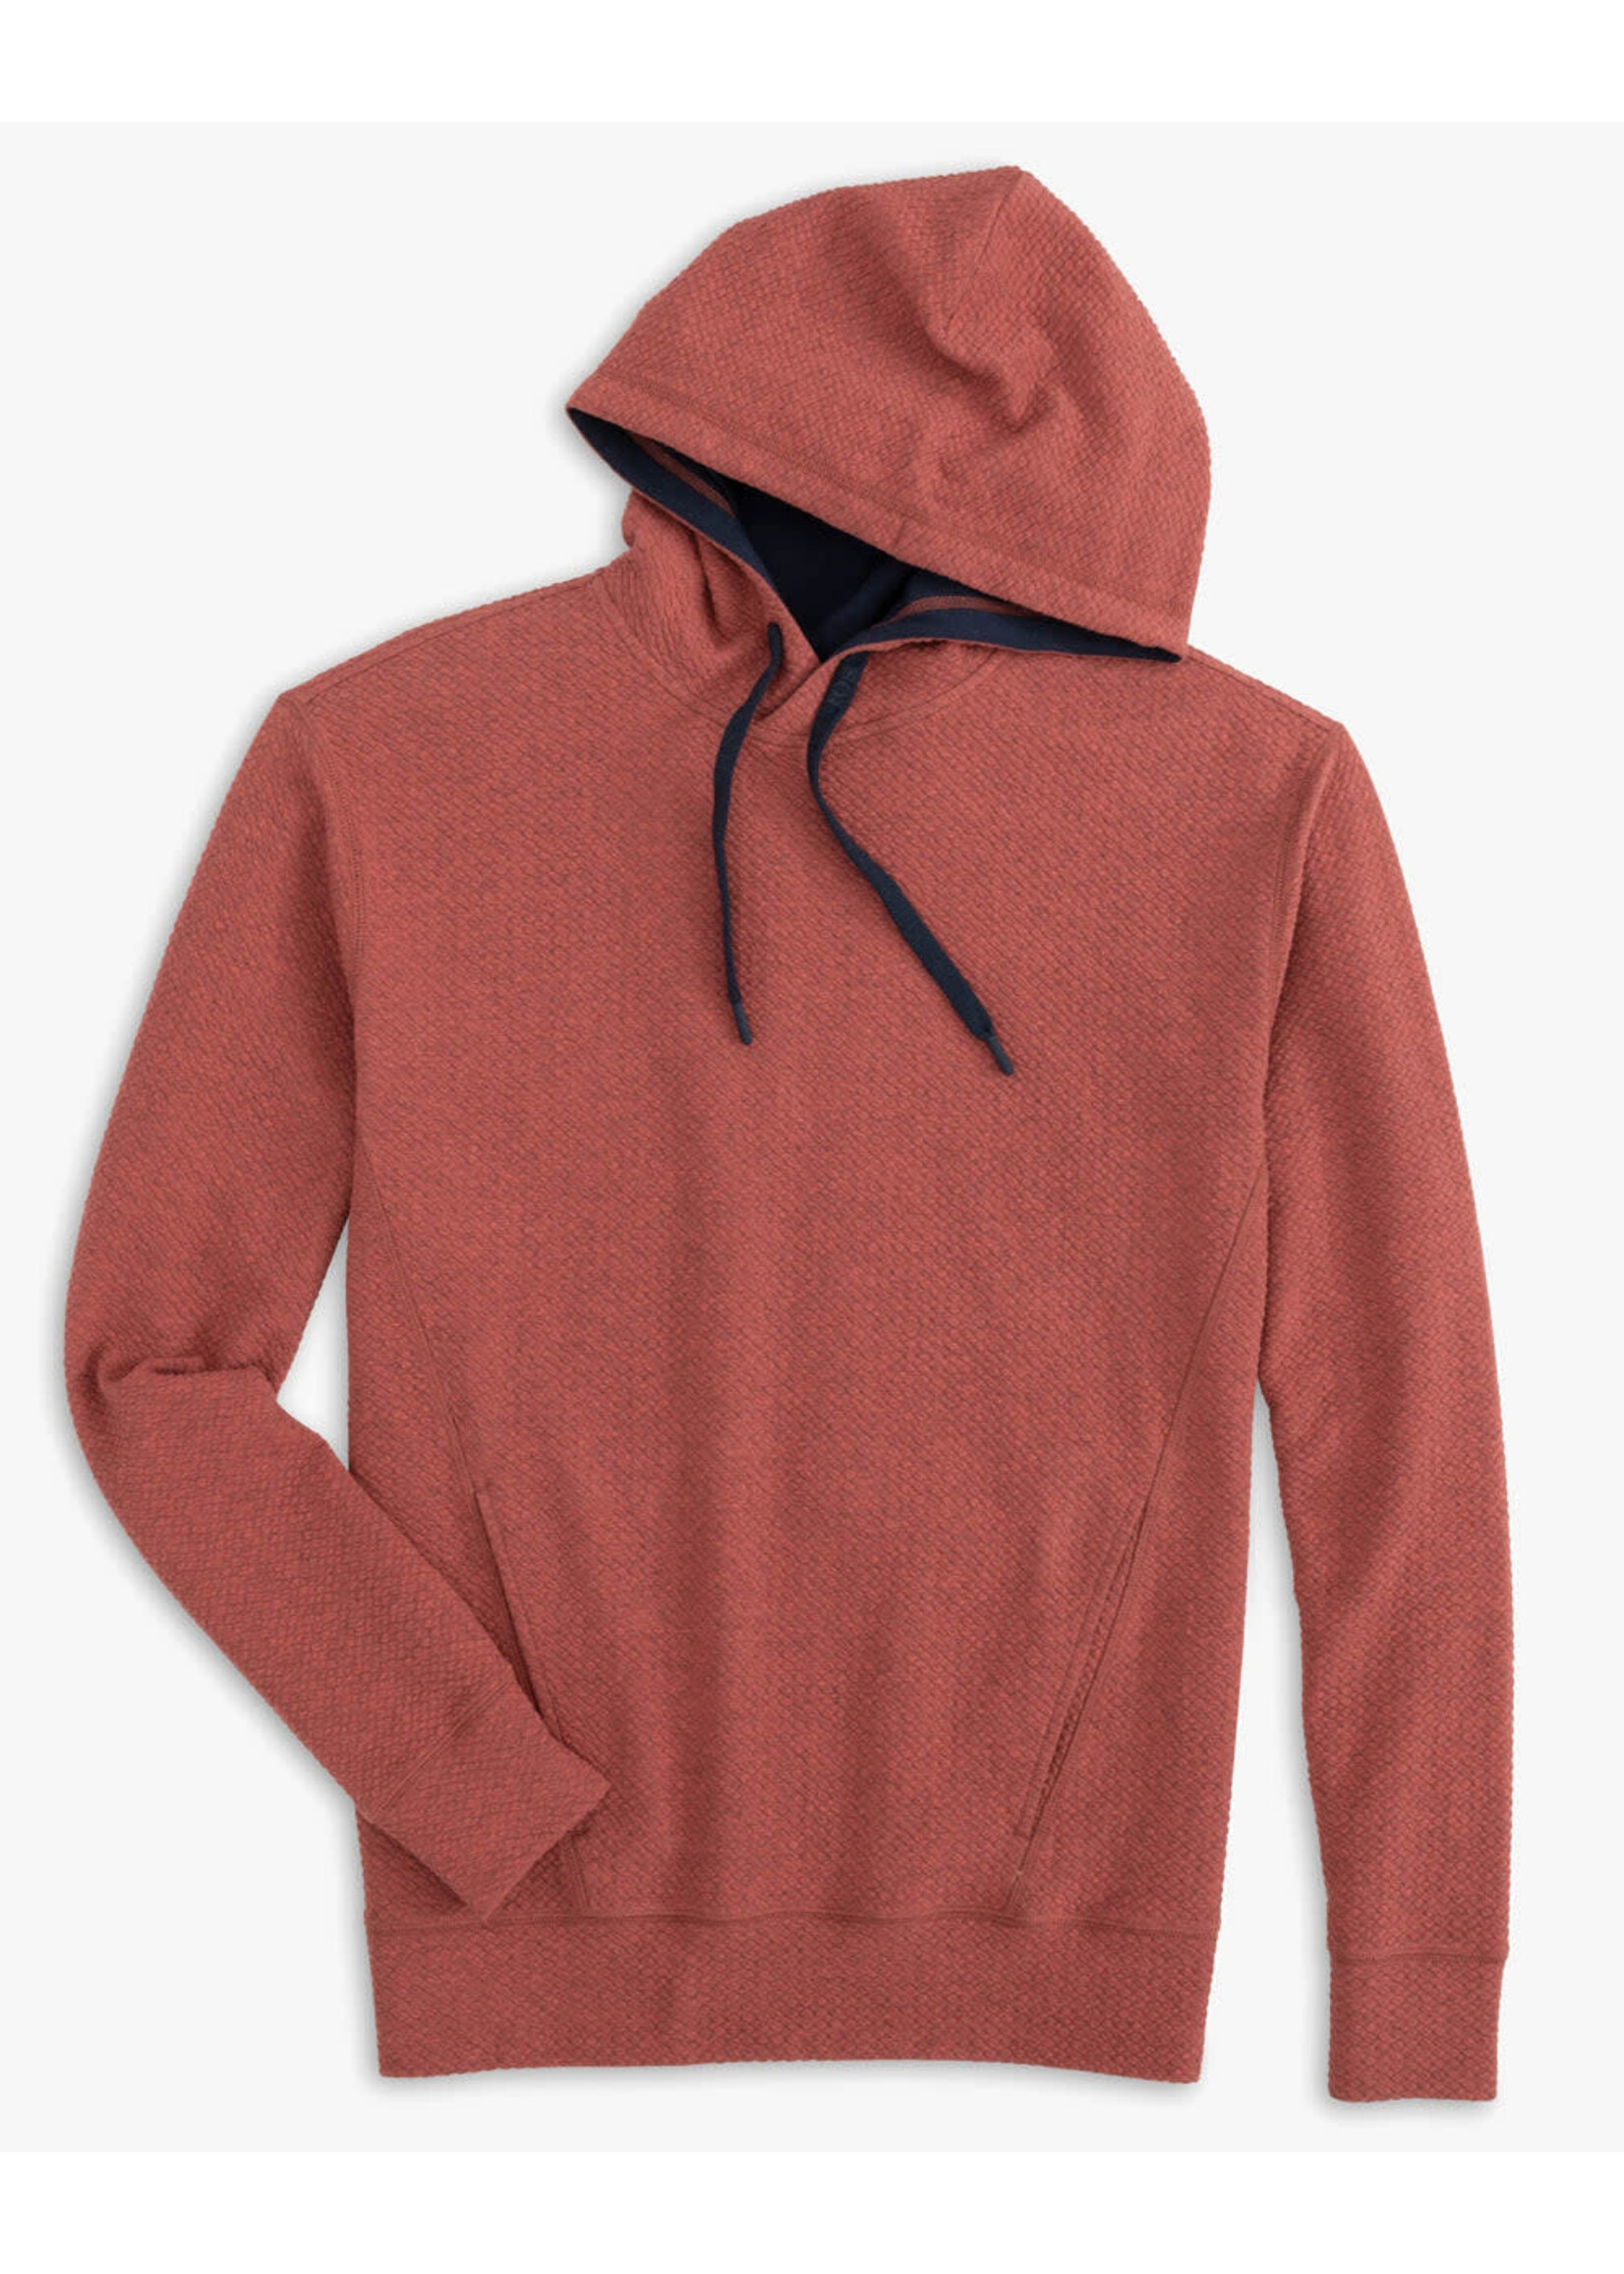 Southern Tide Outbound hoodie